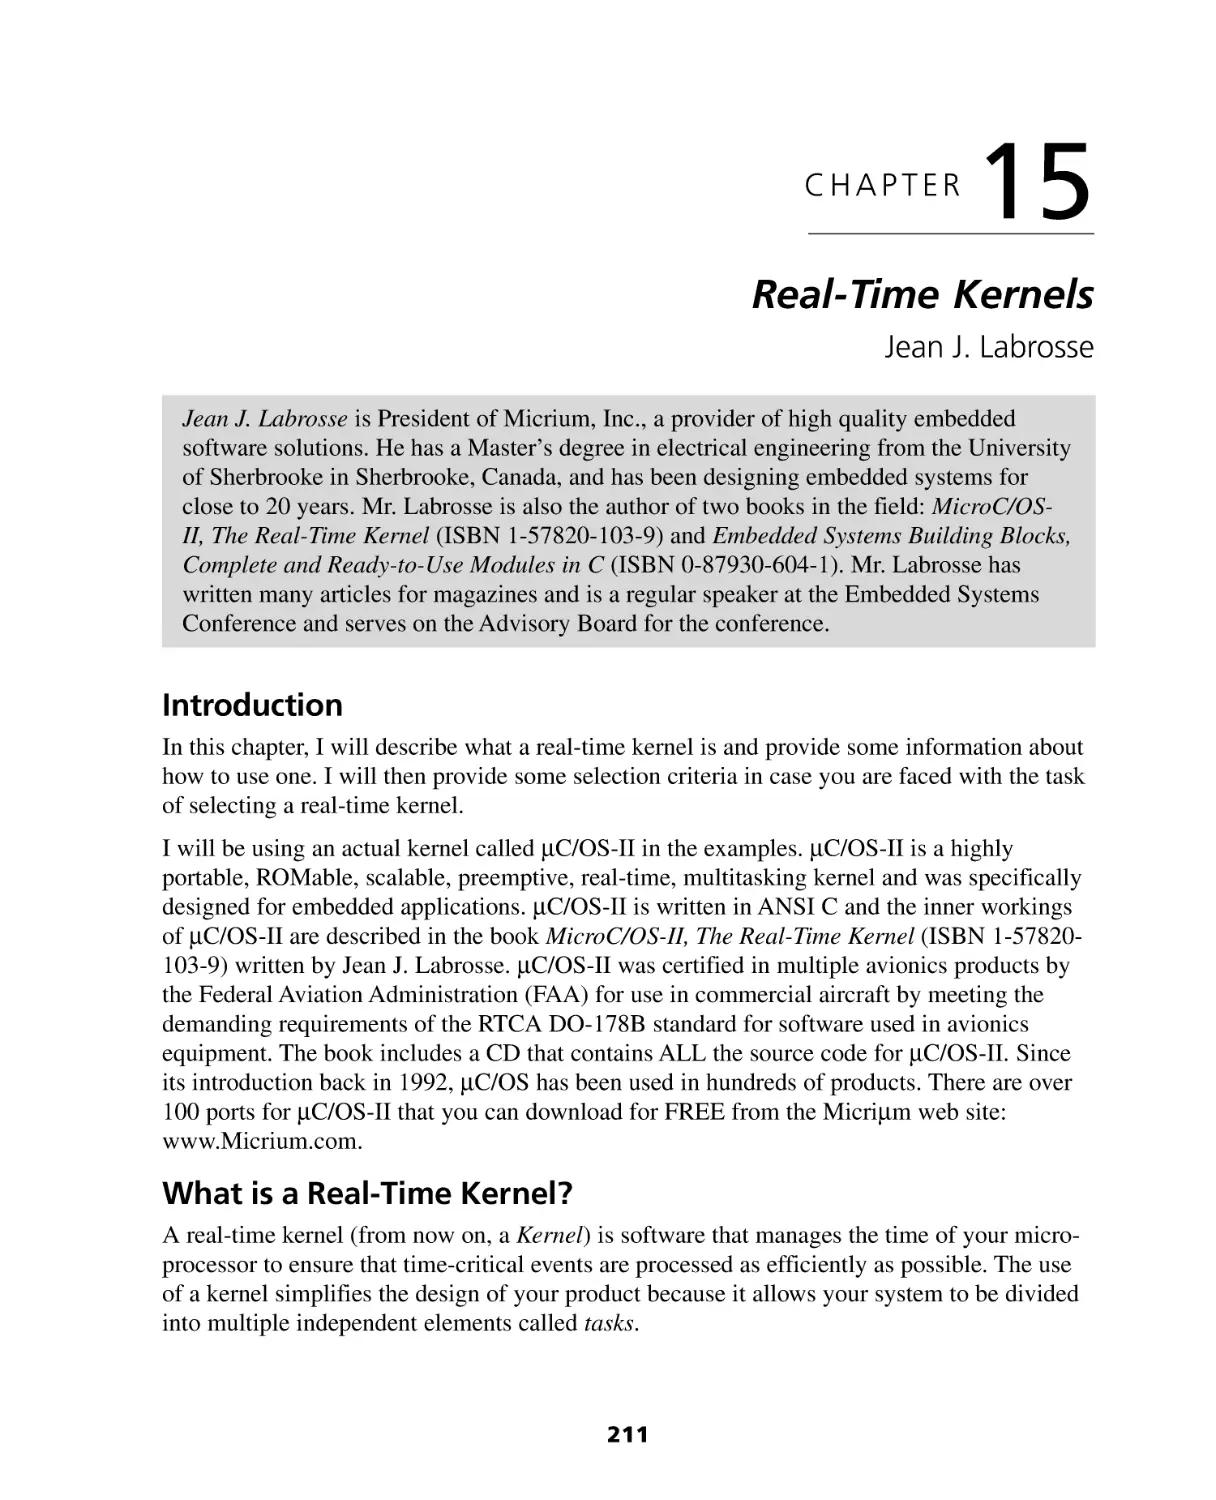 Chapter 15
Introduction
What is a Real-Time Kernel?